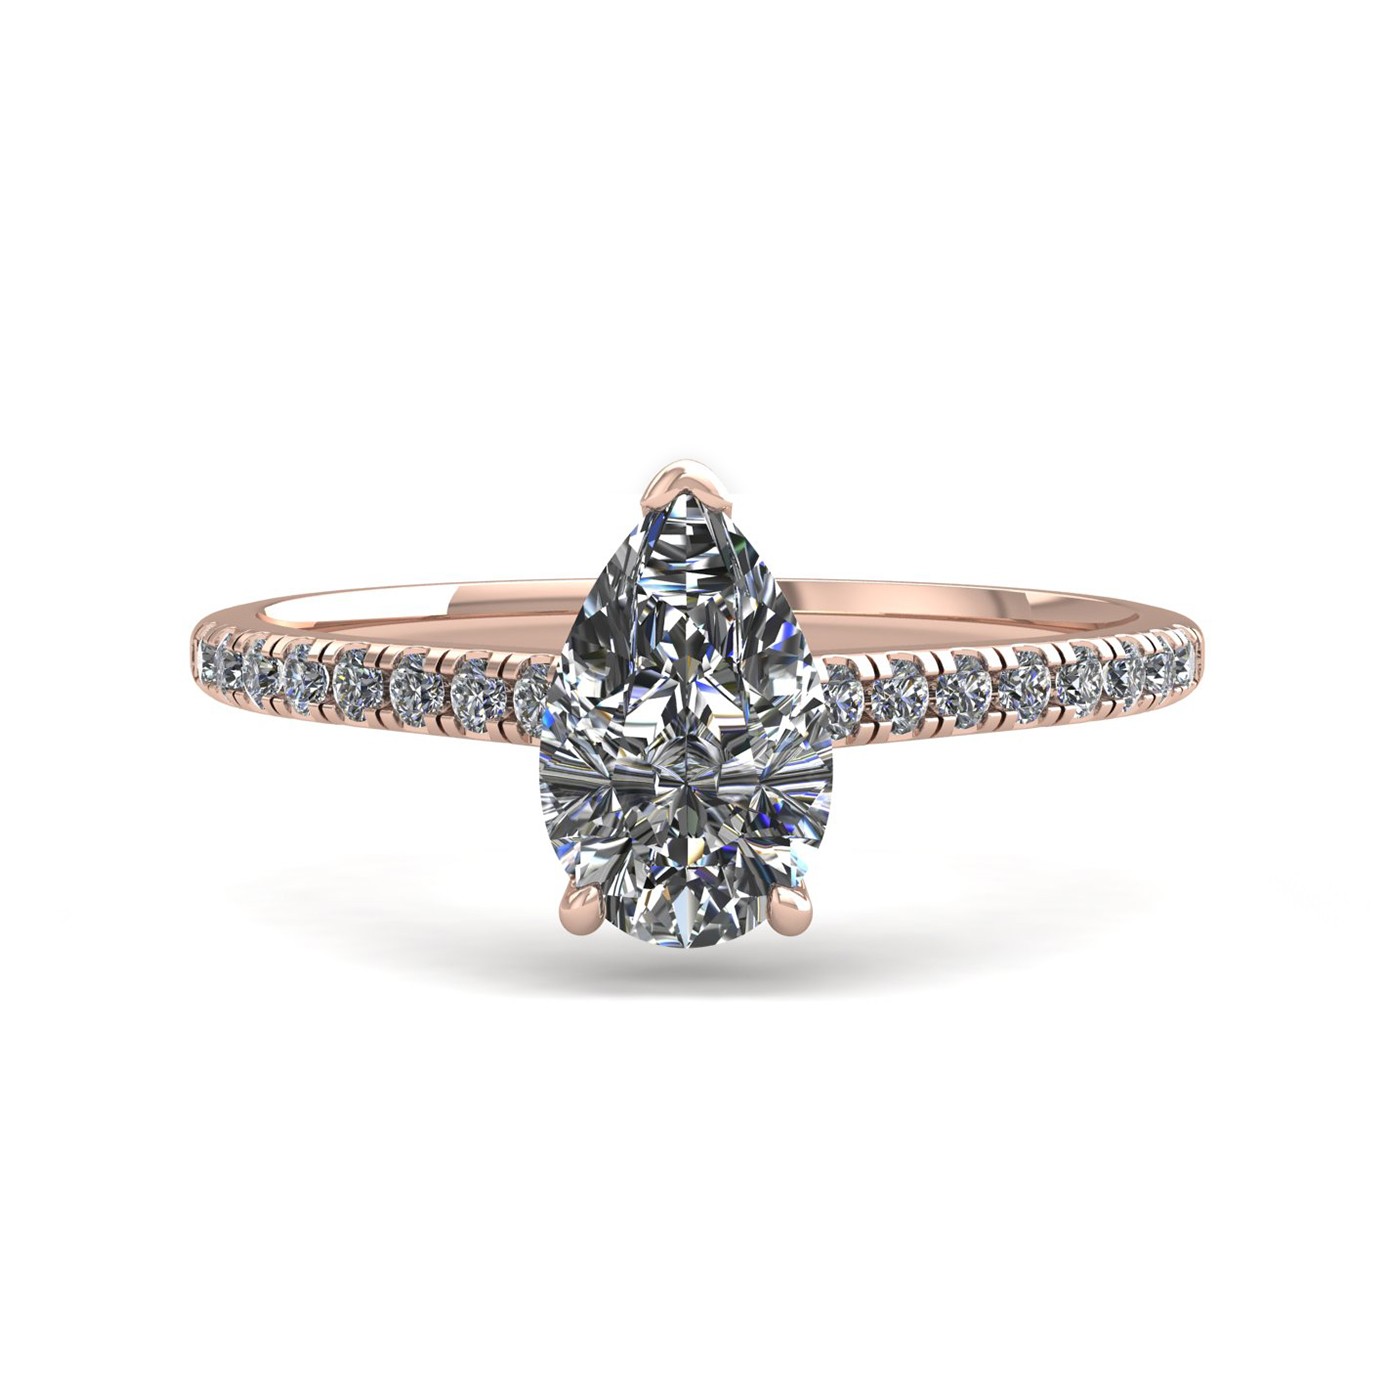 18k rose gold 0,80 ct 3 prongs pear diamond engagement ring with whisper thin pavÉ set band